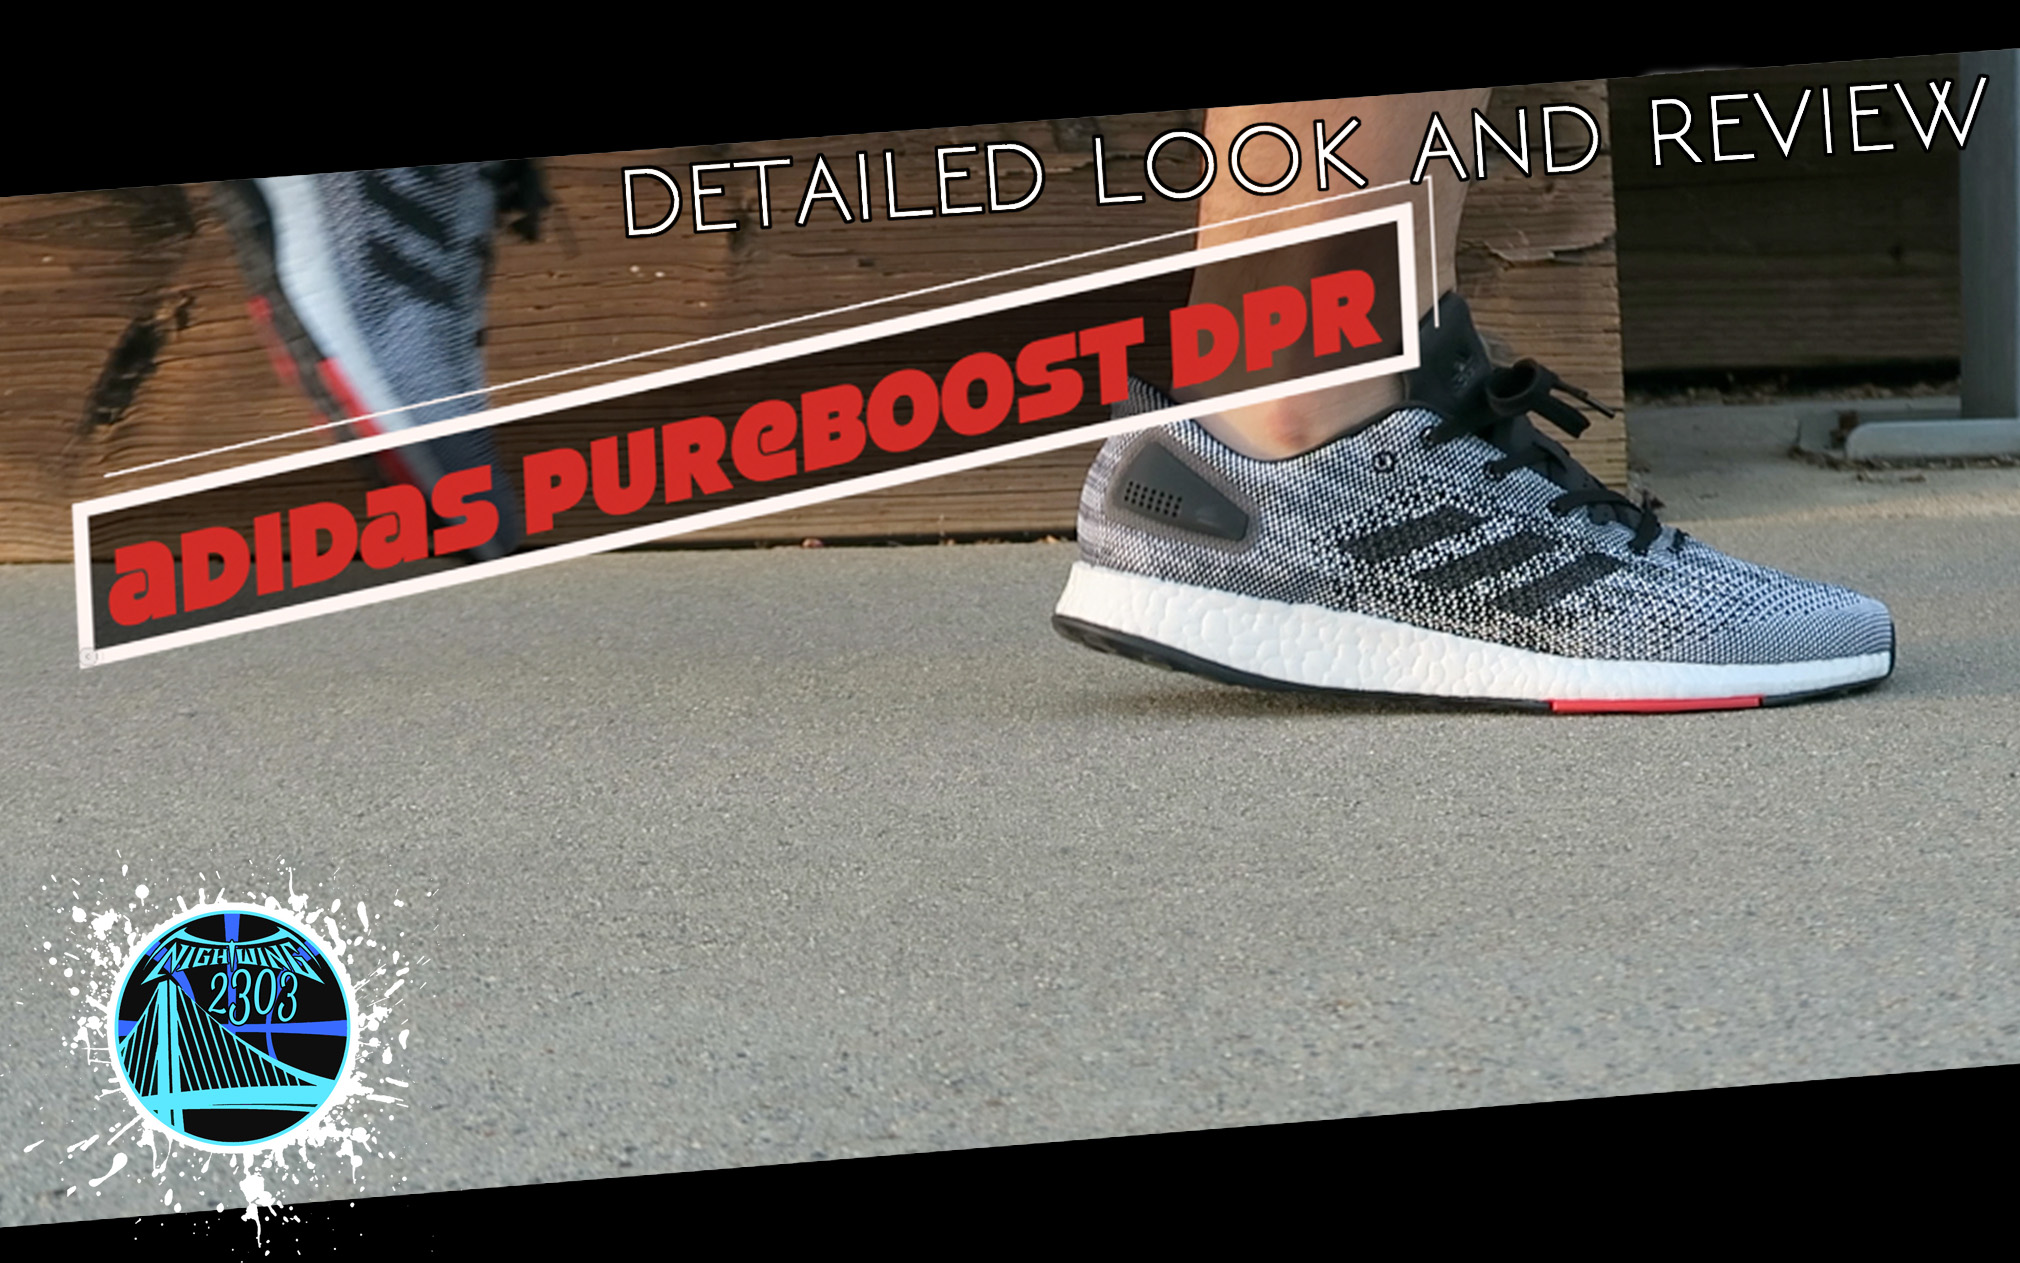 adidas pureboost dpr detailed look and review